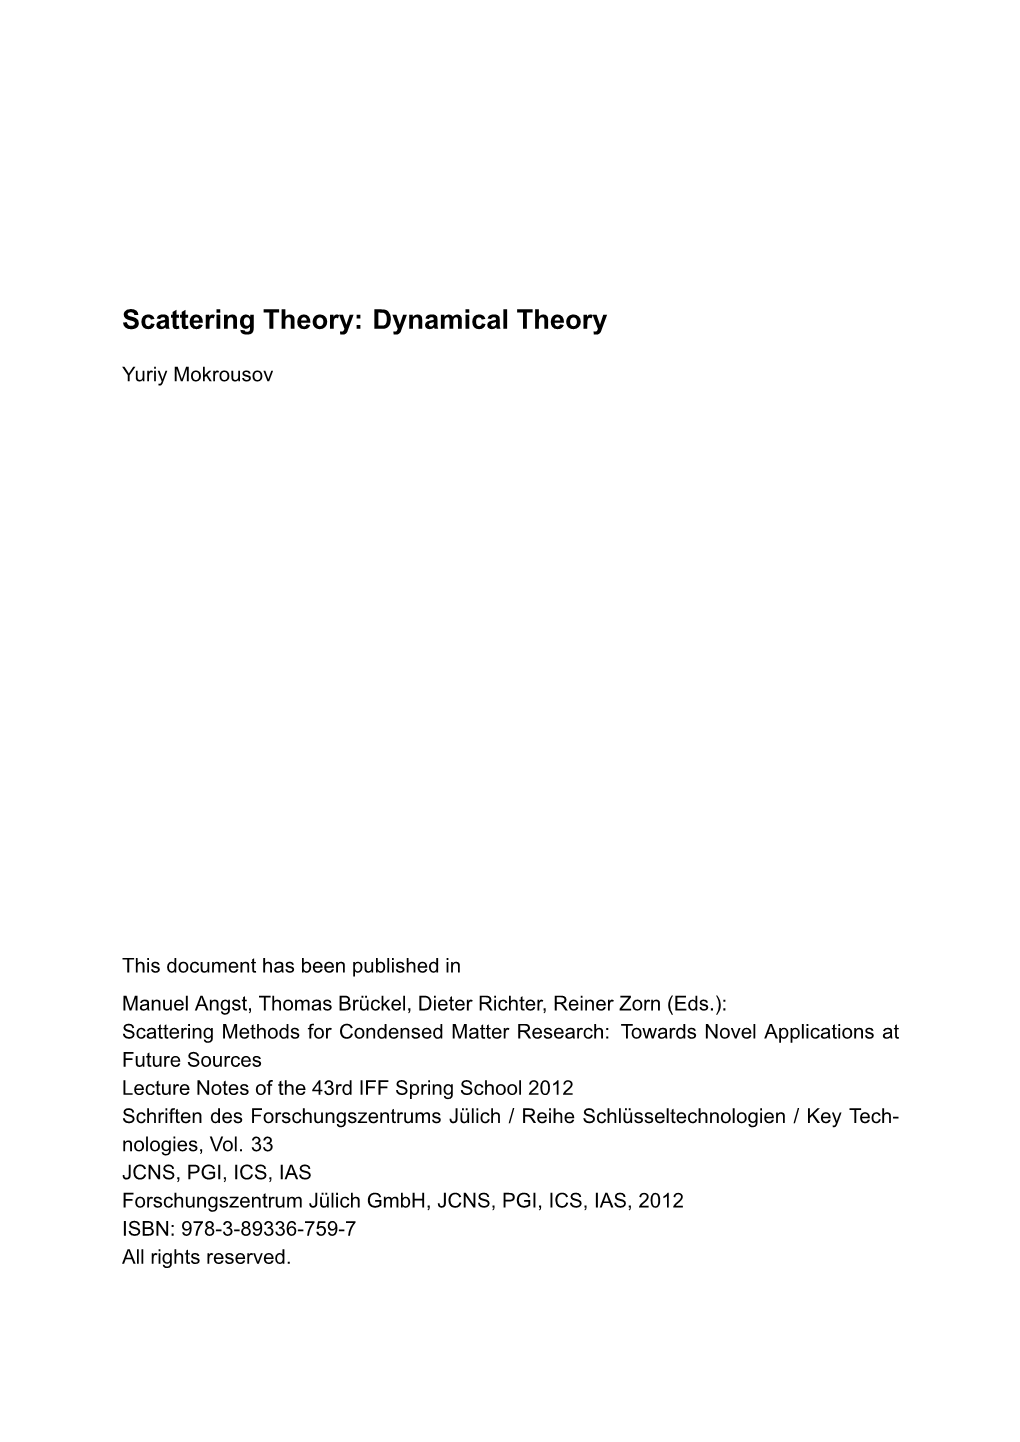 Scattering Theory: Dynamical Theory